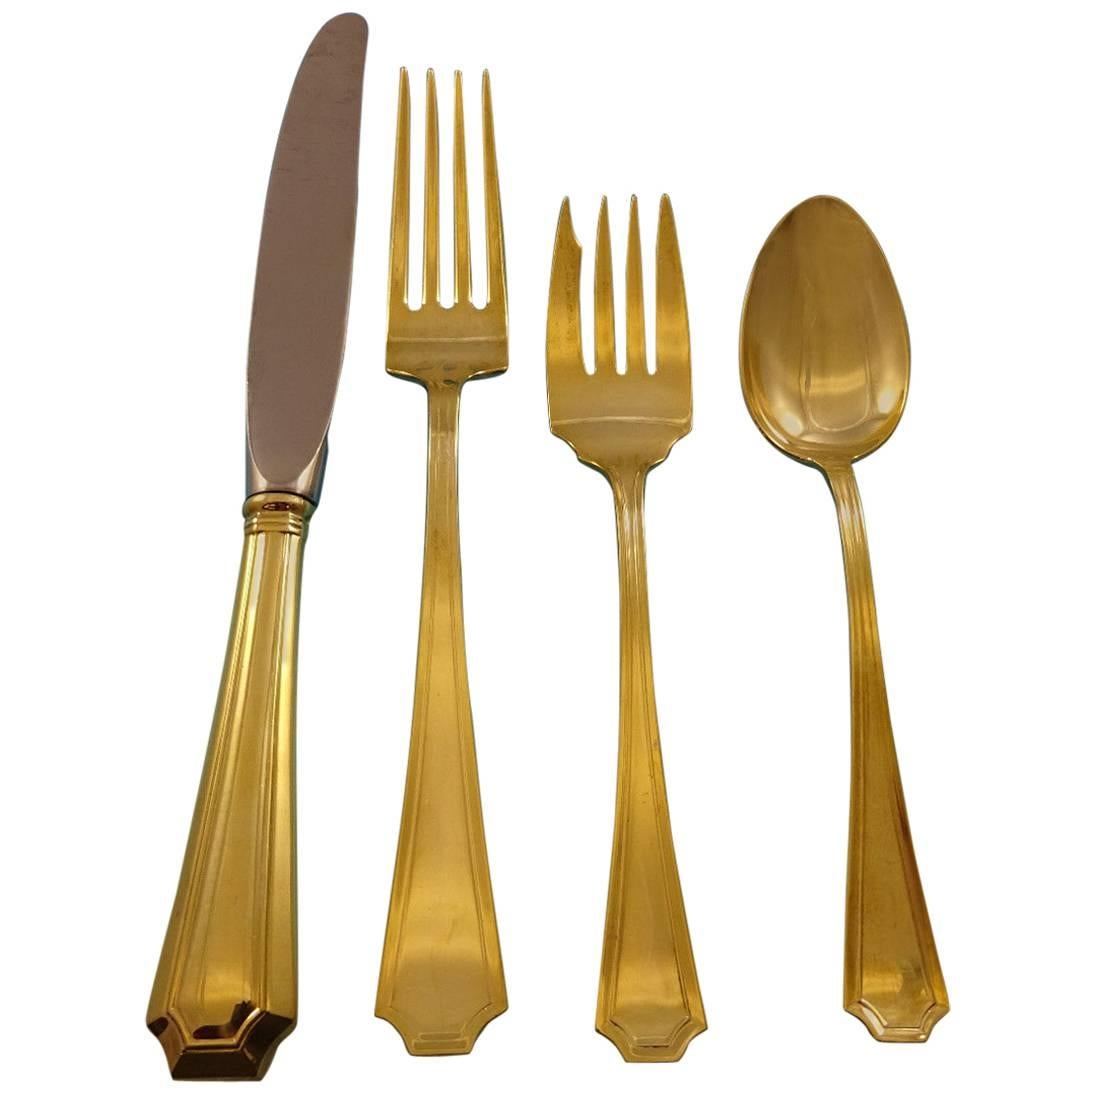 Fairfax by Gorham Sterling Silver Flatware Service for 12, Set in Gold 48 Pieces For Sale